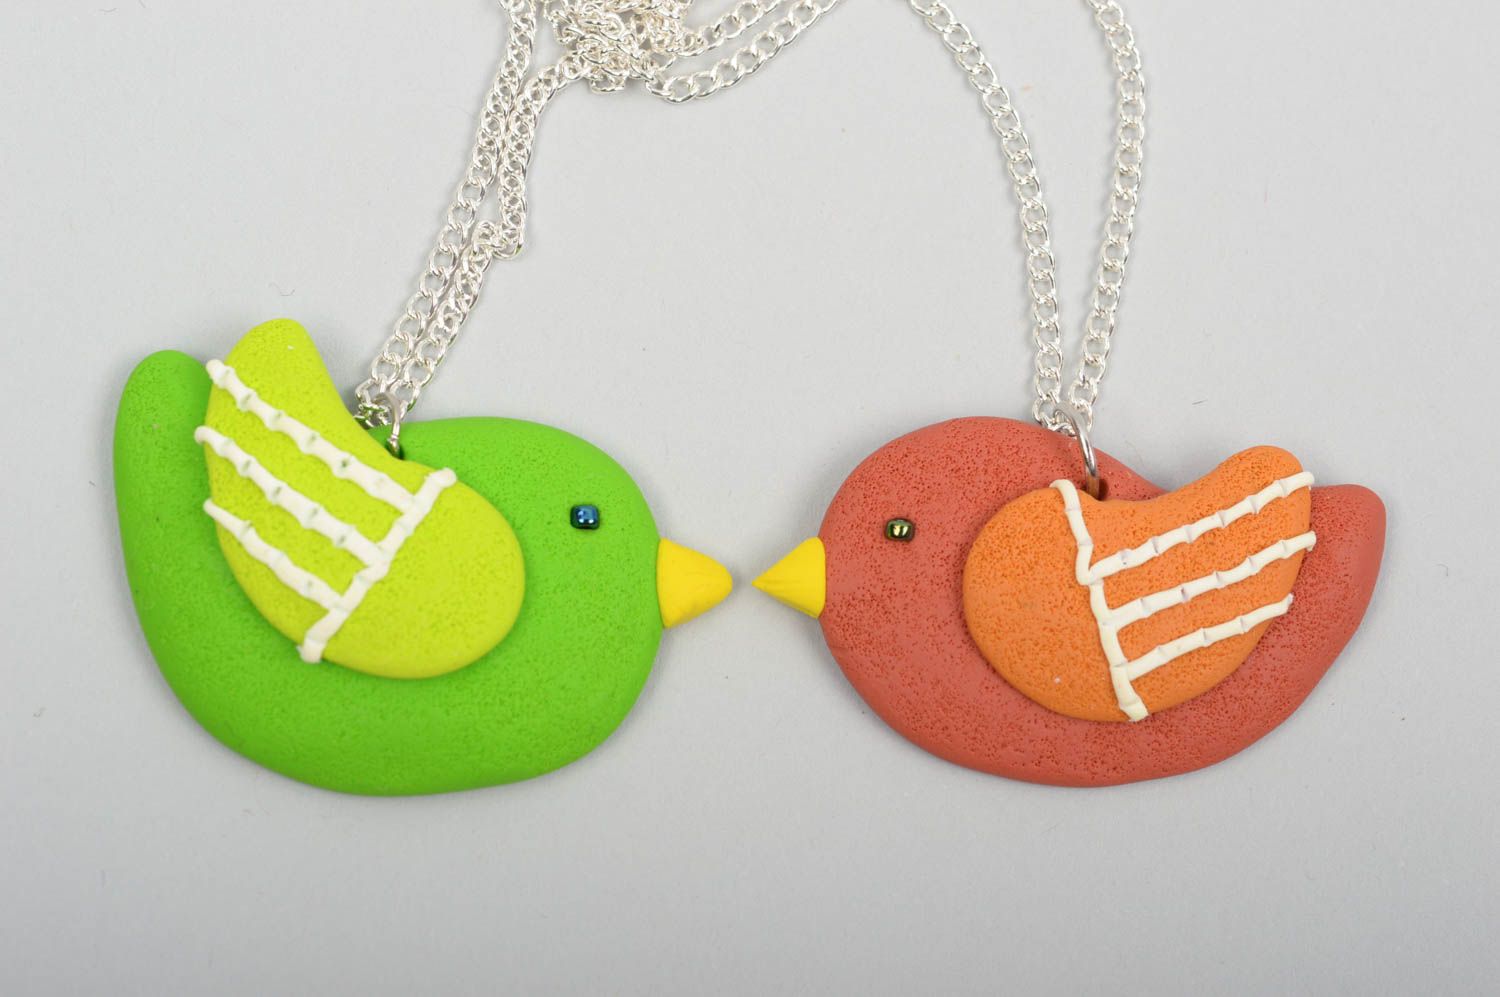 Homemade jewelry 2 polymer clay pendant necklaces kids jewelry gifts for girls photo 2